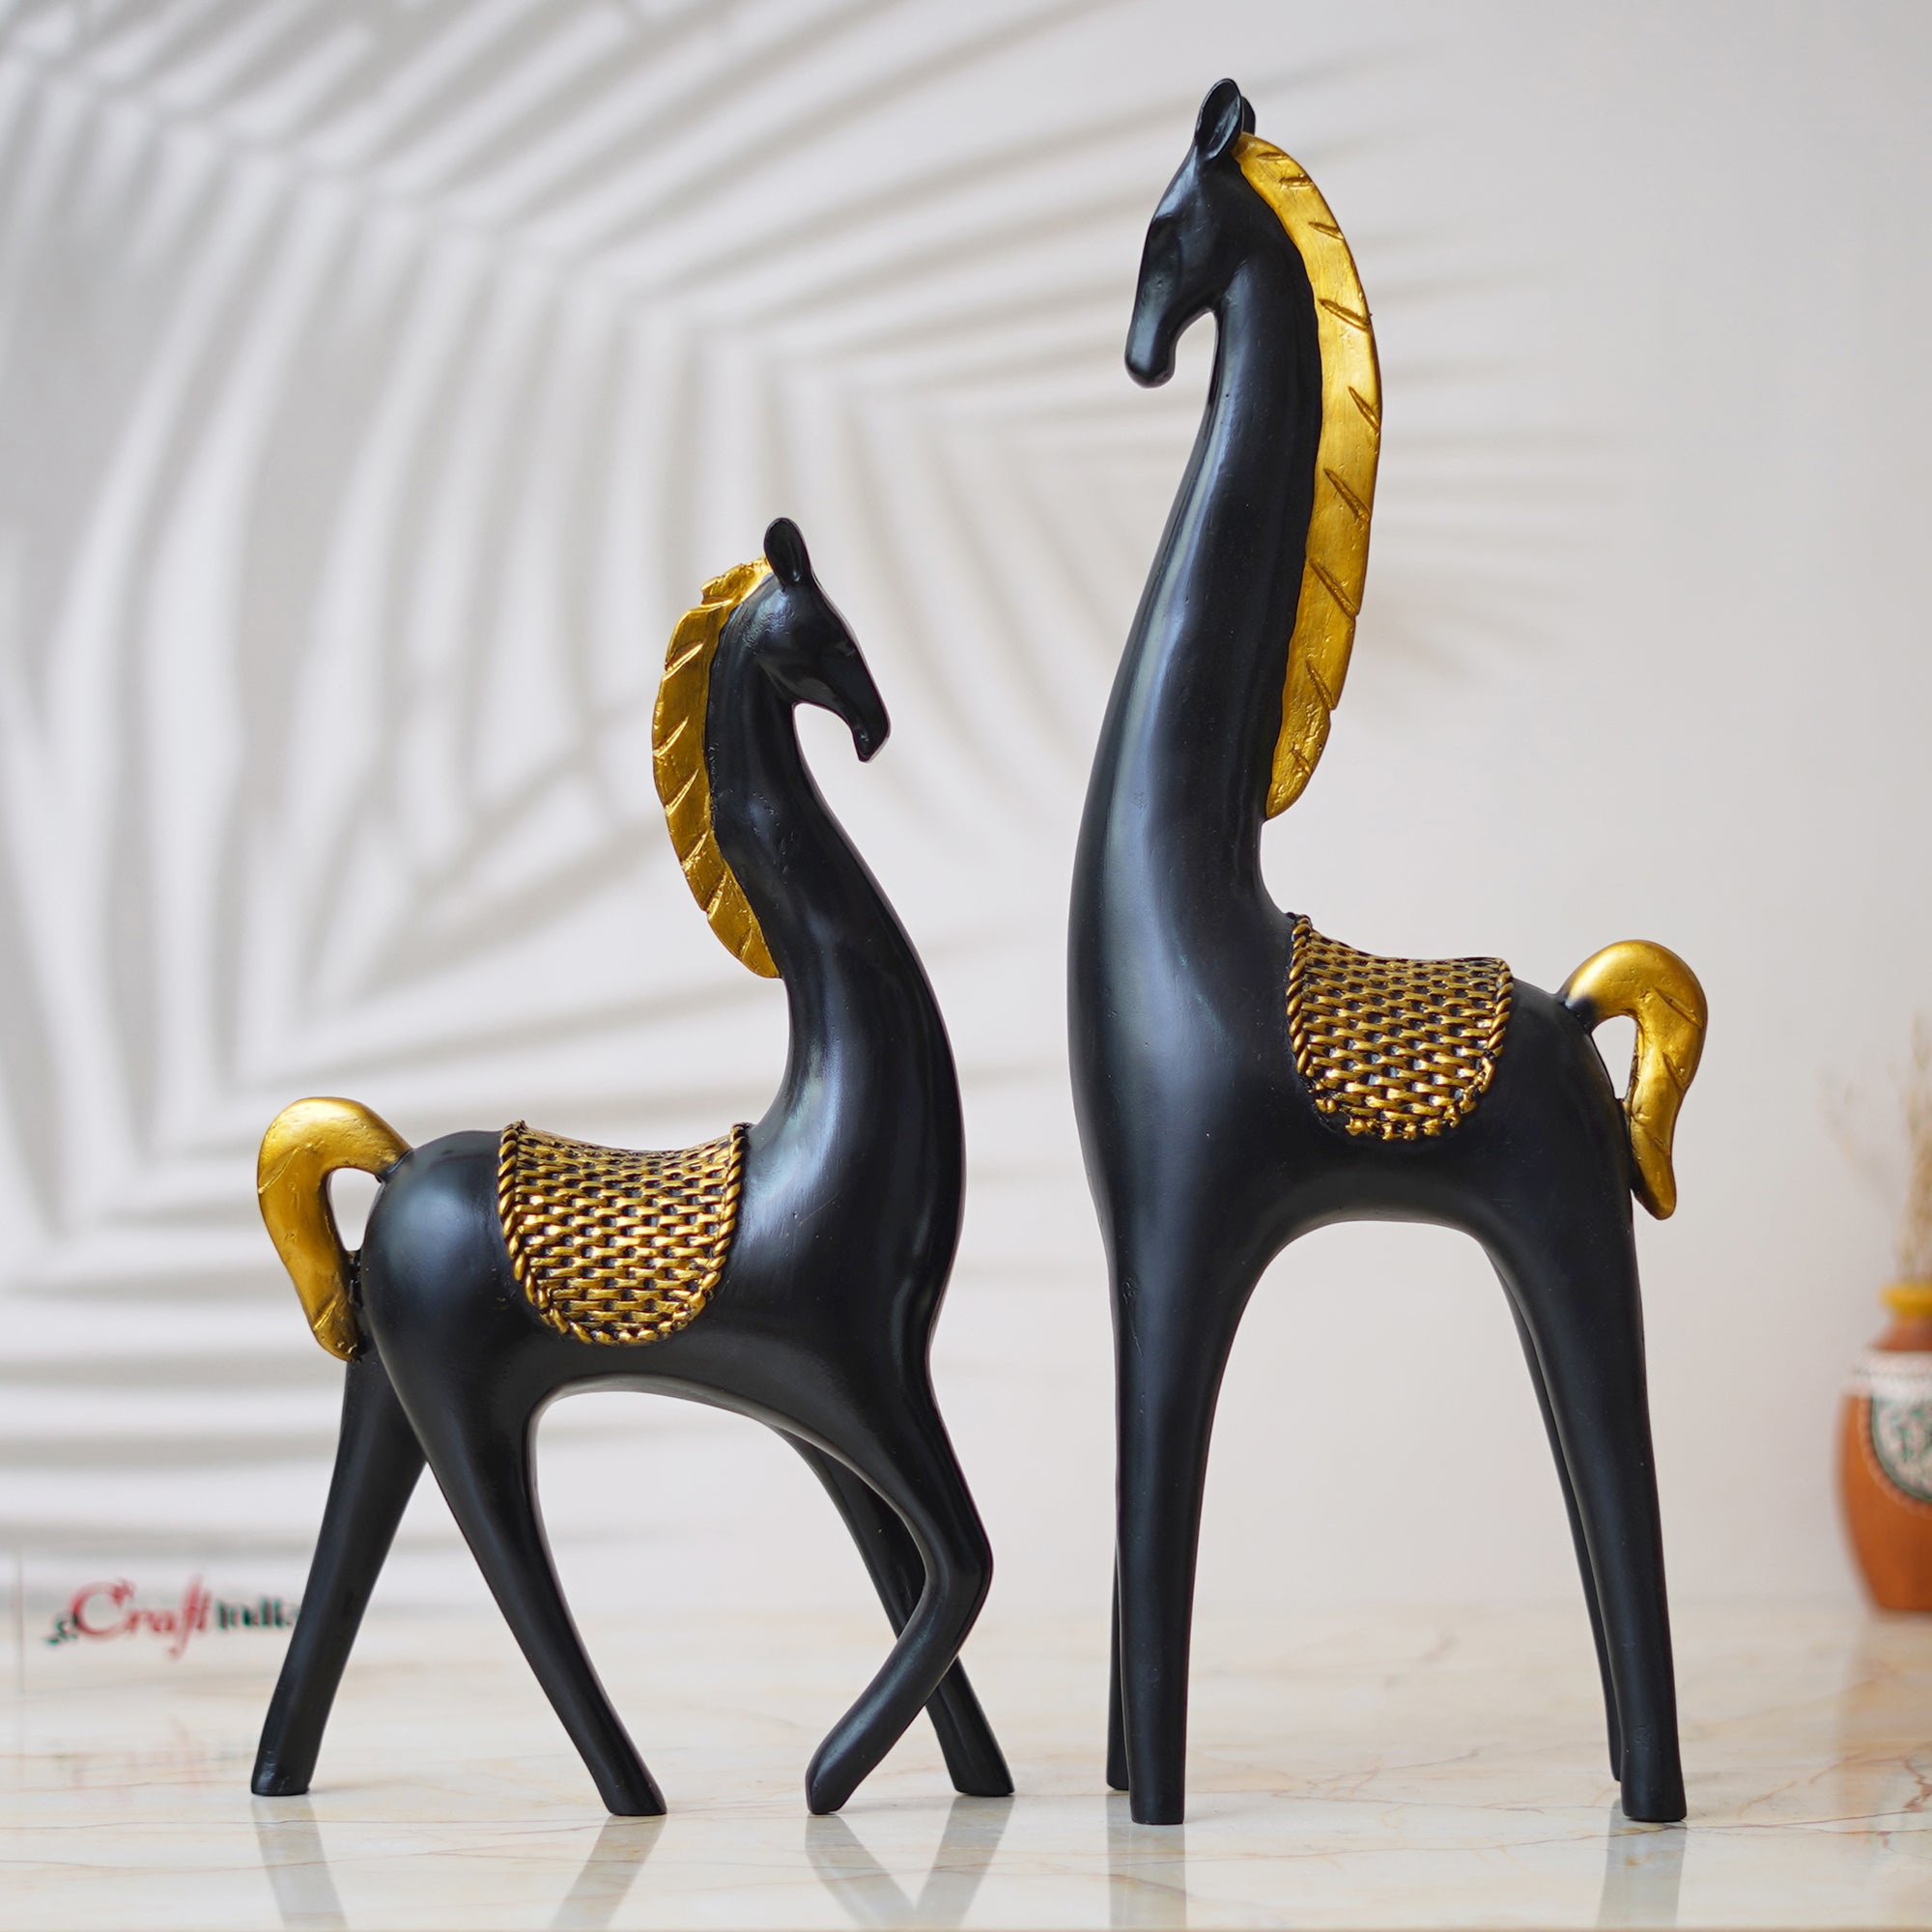 Set of 2 Black Horse Statues with Golden Hair Decorative Animal Figurines